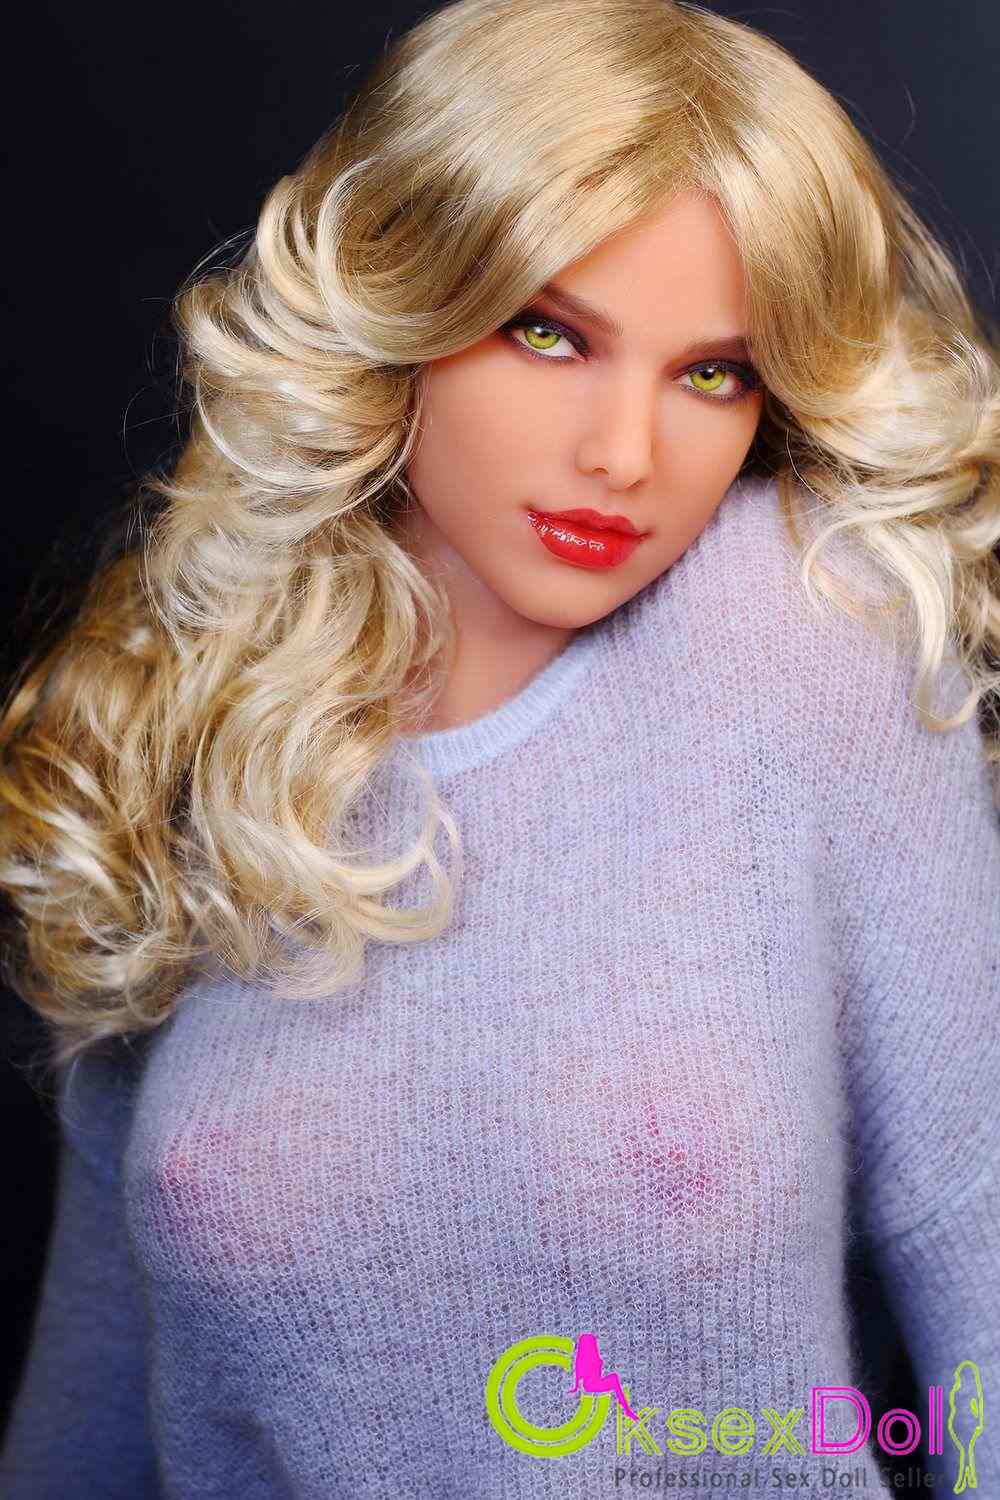 life size female sex doll